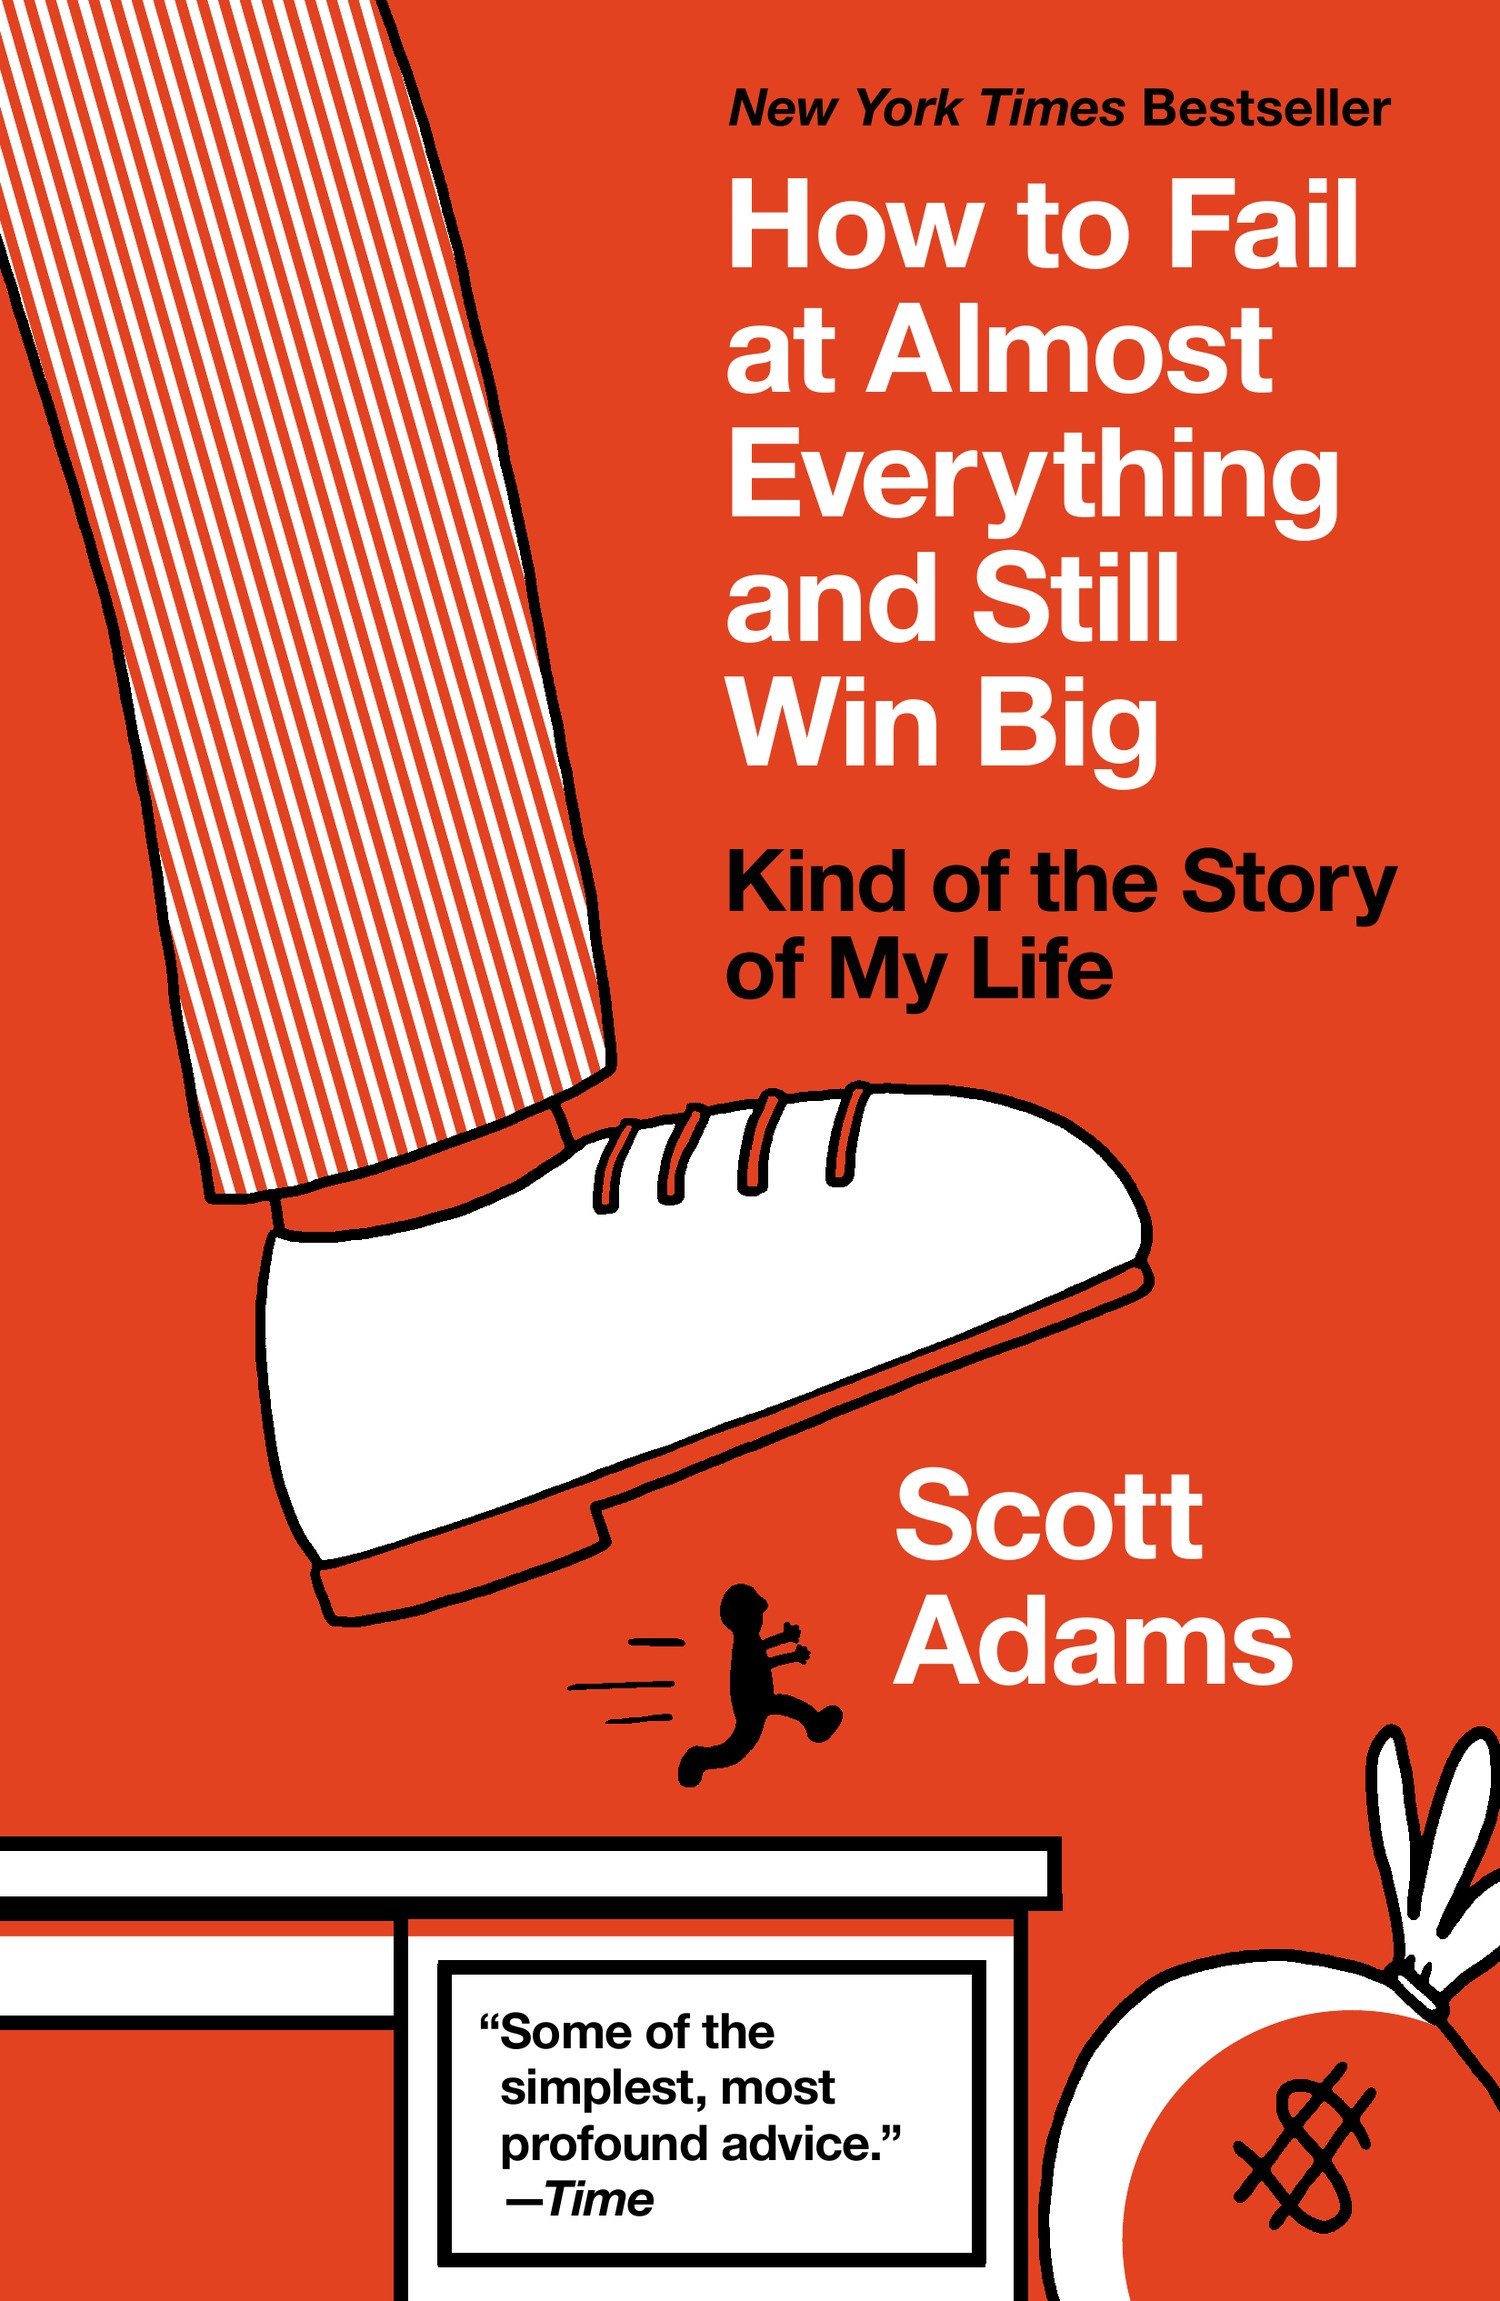 How to fail at almost everything and still win big kind of the story of my life cover image